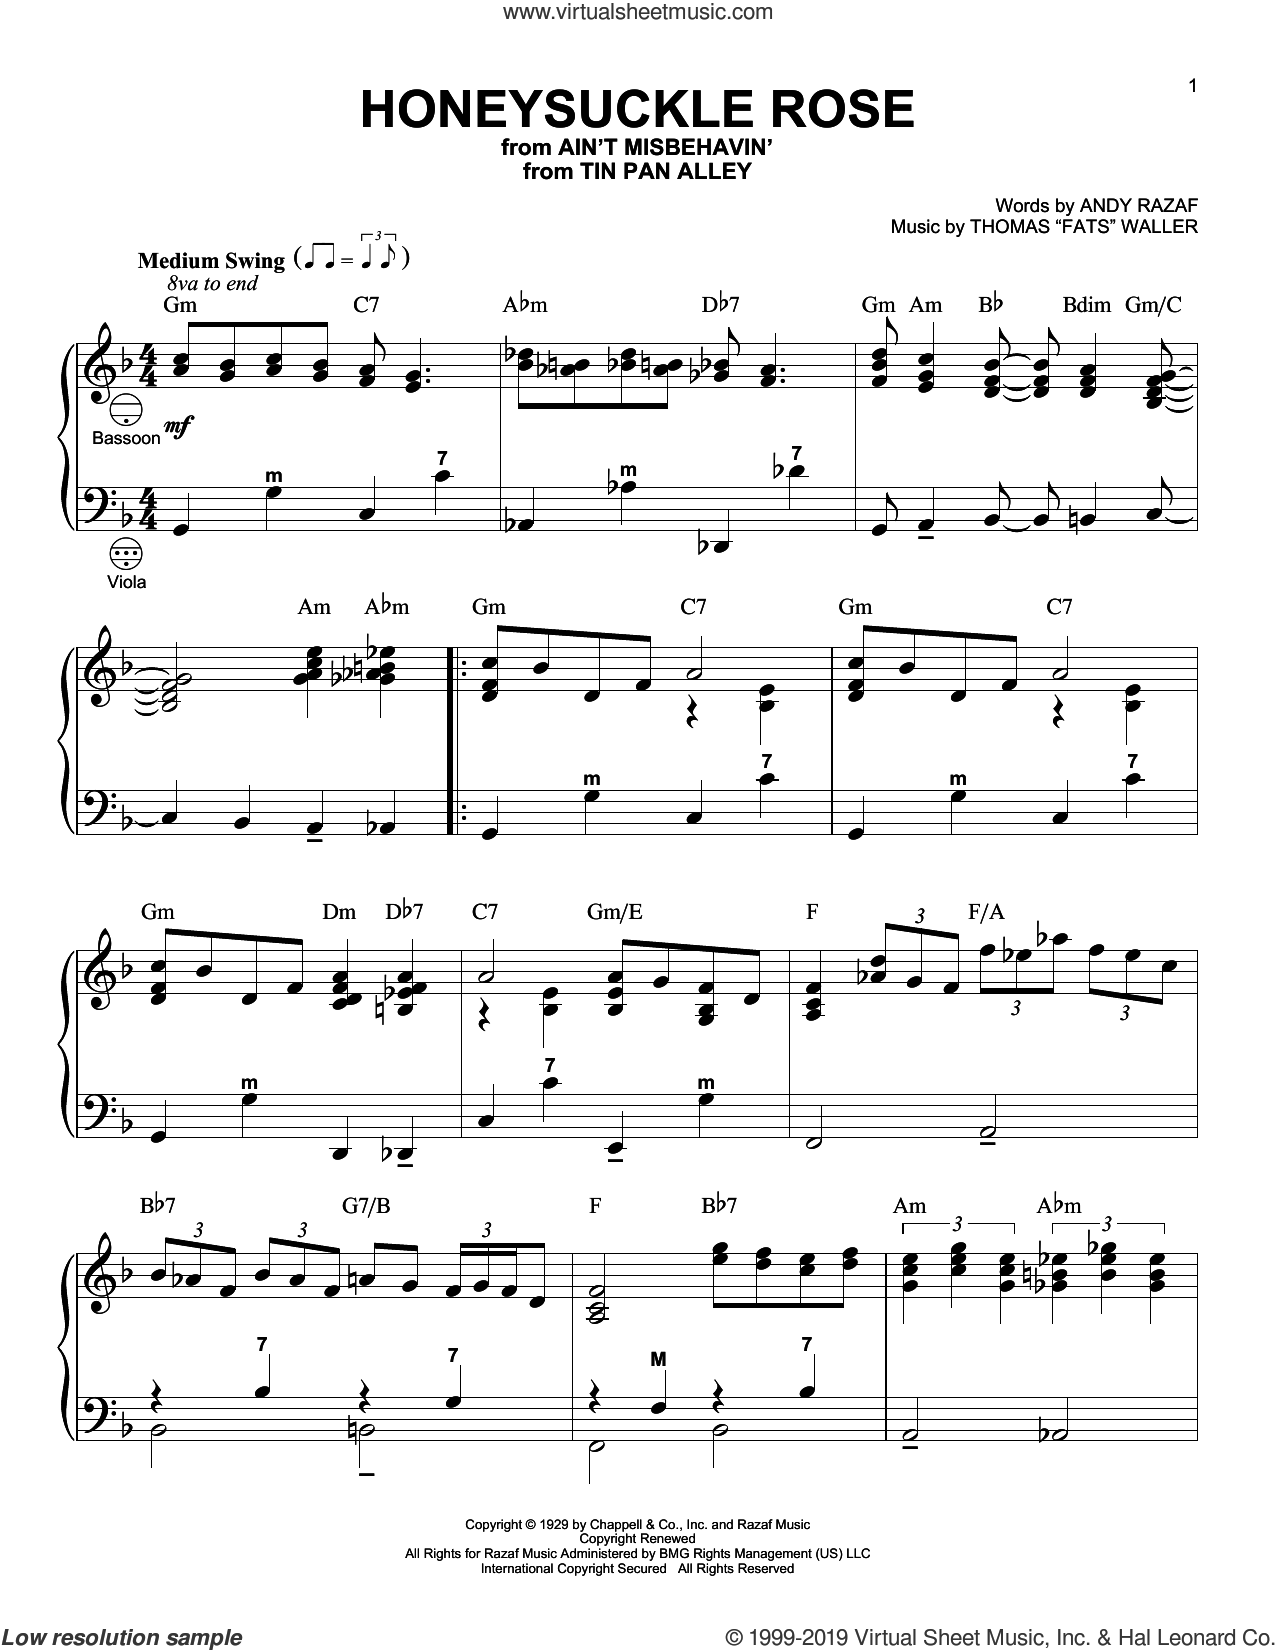 La Vie En Rose (Take Me To Your Heart Again) (arr. Gary Meisner) sheet  music for accordion